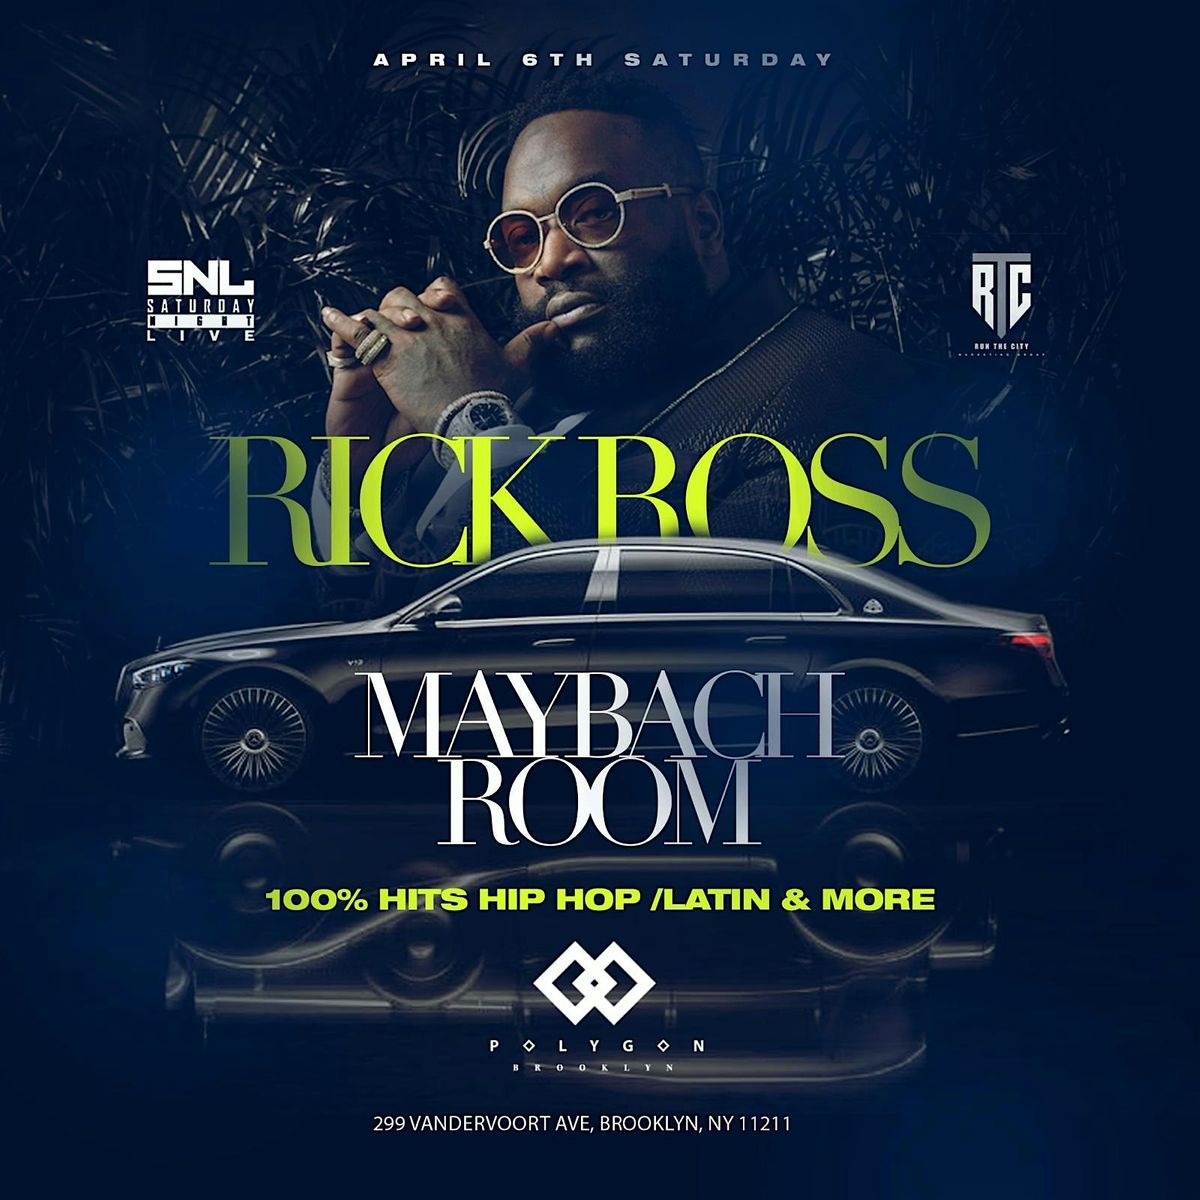 A Night  with Rick Ross @ Polygon in Brooklyn: Free entry with rsvp